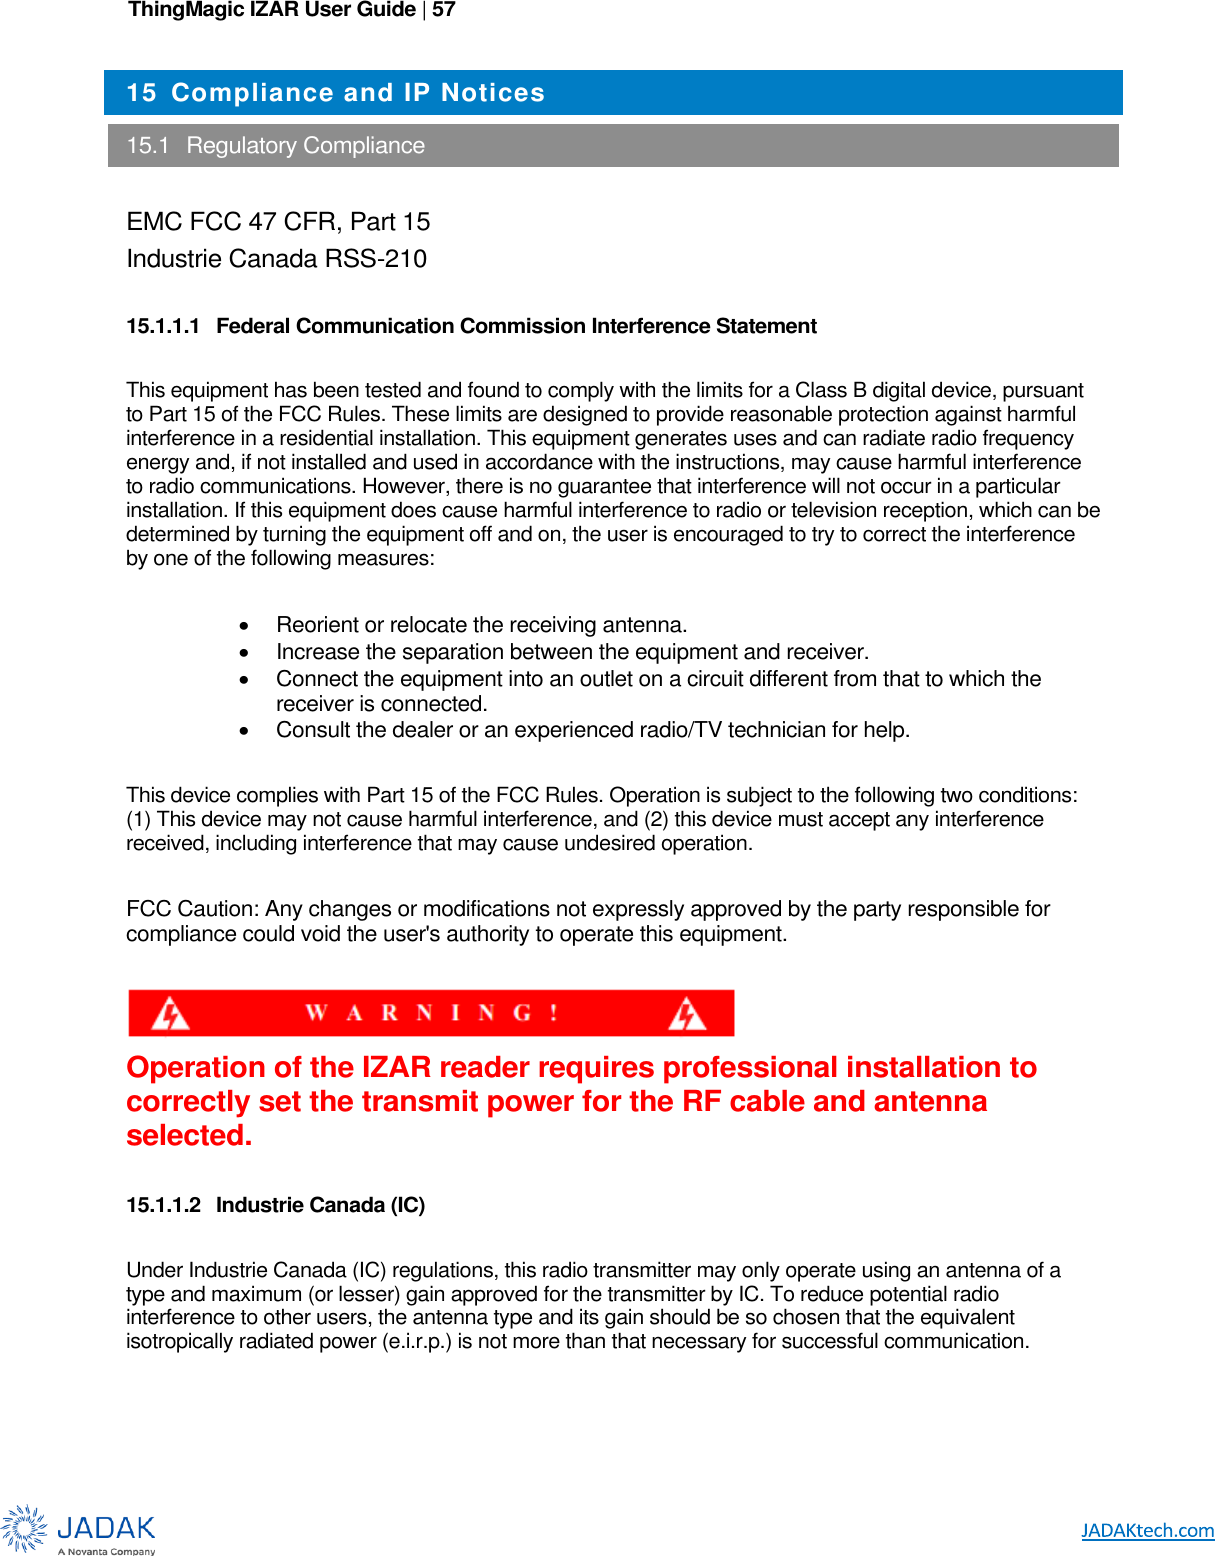 ThingMagic IZAR User Guide | 57      15 Compliance and IP Notices  15.1  Regulatory Compliance  EMC FCC 47 CFR, Part 15 Industrie Canada RSS-210  15.1.1.1  Federal Communication Commission Interference Statement  This equipment has been tested and found to comply with the limits for a Class B digital device, pursuant to Part 15 of the FCC Rules. These limits are designed to provide reasonable protection against harmful interference in a residential installation. This equipment generates uses and can radiate radio frequency energy and, if not installed and used in accordance with the instructions, may cause harmful interference to radio communications. However, there is no guarantee that interference will not occur in a particular installation. If this equipment does cause harmful interference to radio or television reception, which can be determined by turning the equipment off and on, the user is encouraged to try to correct the interference by one of the following measures:    Reorient or relocate the receiving antenna.   Increase the separation between the equipment and receiver.   Connect the equipment into an outlet on a circuit different from that to which the receiver is connected.   Consult the dealer or an experienced radio/TV technician for help.  This device complies with Part 15 of the FCC Rules. Operation is subject to the following two conditions: (1) This device may not cause harmful interference, and (2) this device must accept any interference received, including interference that may cause undesired operation.  FCC Caution: Any changes or modifications not expressly approved by the party responsible for compliance could void the user&apos;s authority to operate this equipment.   Operation of the IZAR reader requires professional installation to correctly set the transmit power for the RF cable and antenna selected.  15.1.1.2  Industrie Canada (IC)  Under Industrie Canada (IC) regulations, this radio transmitter may only operate using an antenna of a type and maximum (or lesser) gain approved for the transmitter by IC. To reduce potential radio interference to other users, the antenna type and its gain should be so chosen that the equivalent isotropically radiated power (e.i.r.p.) is not more than that necessary for successful communication.  